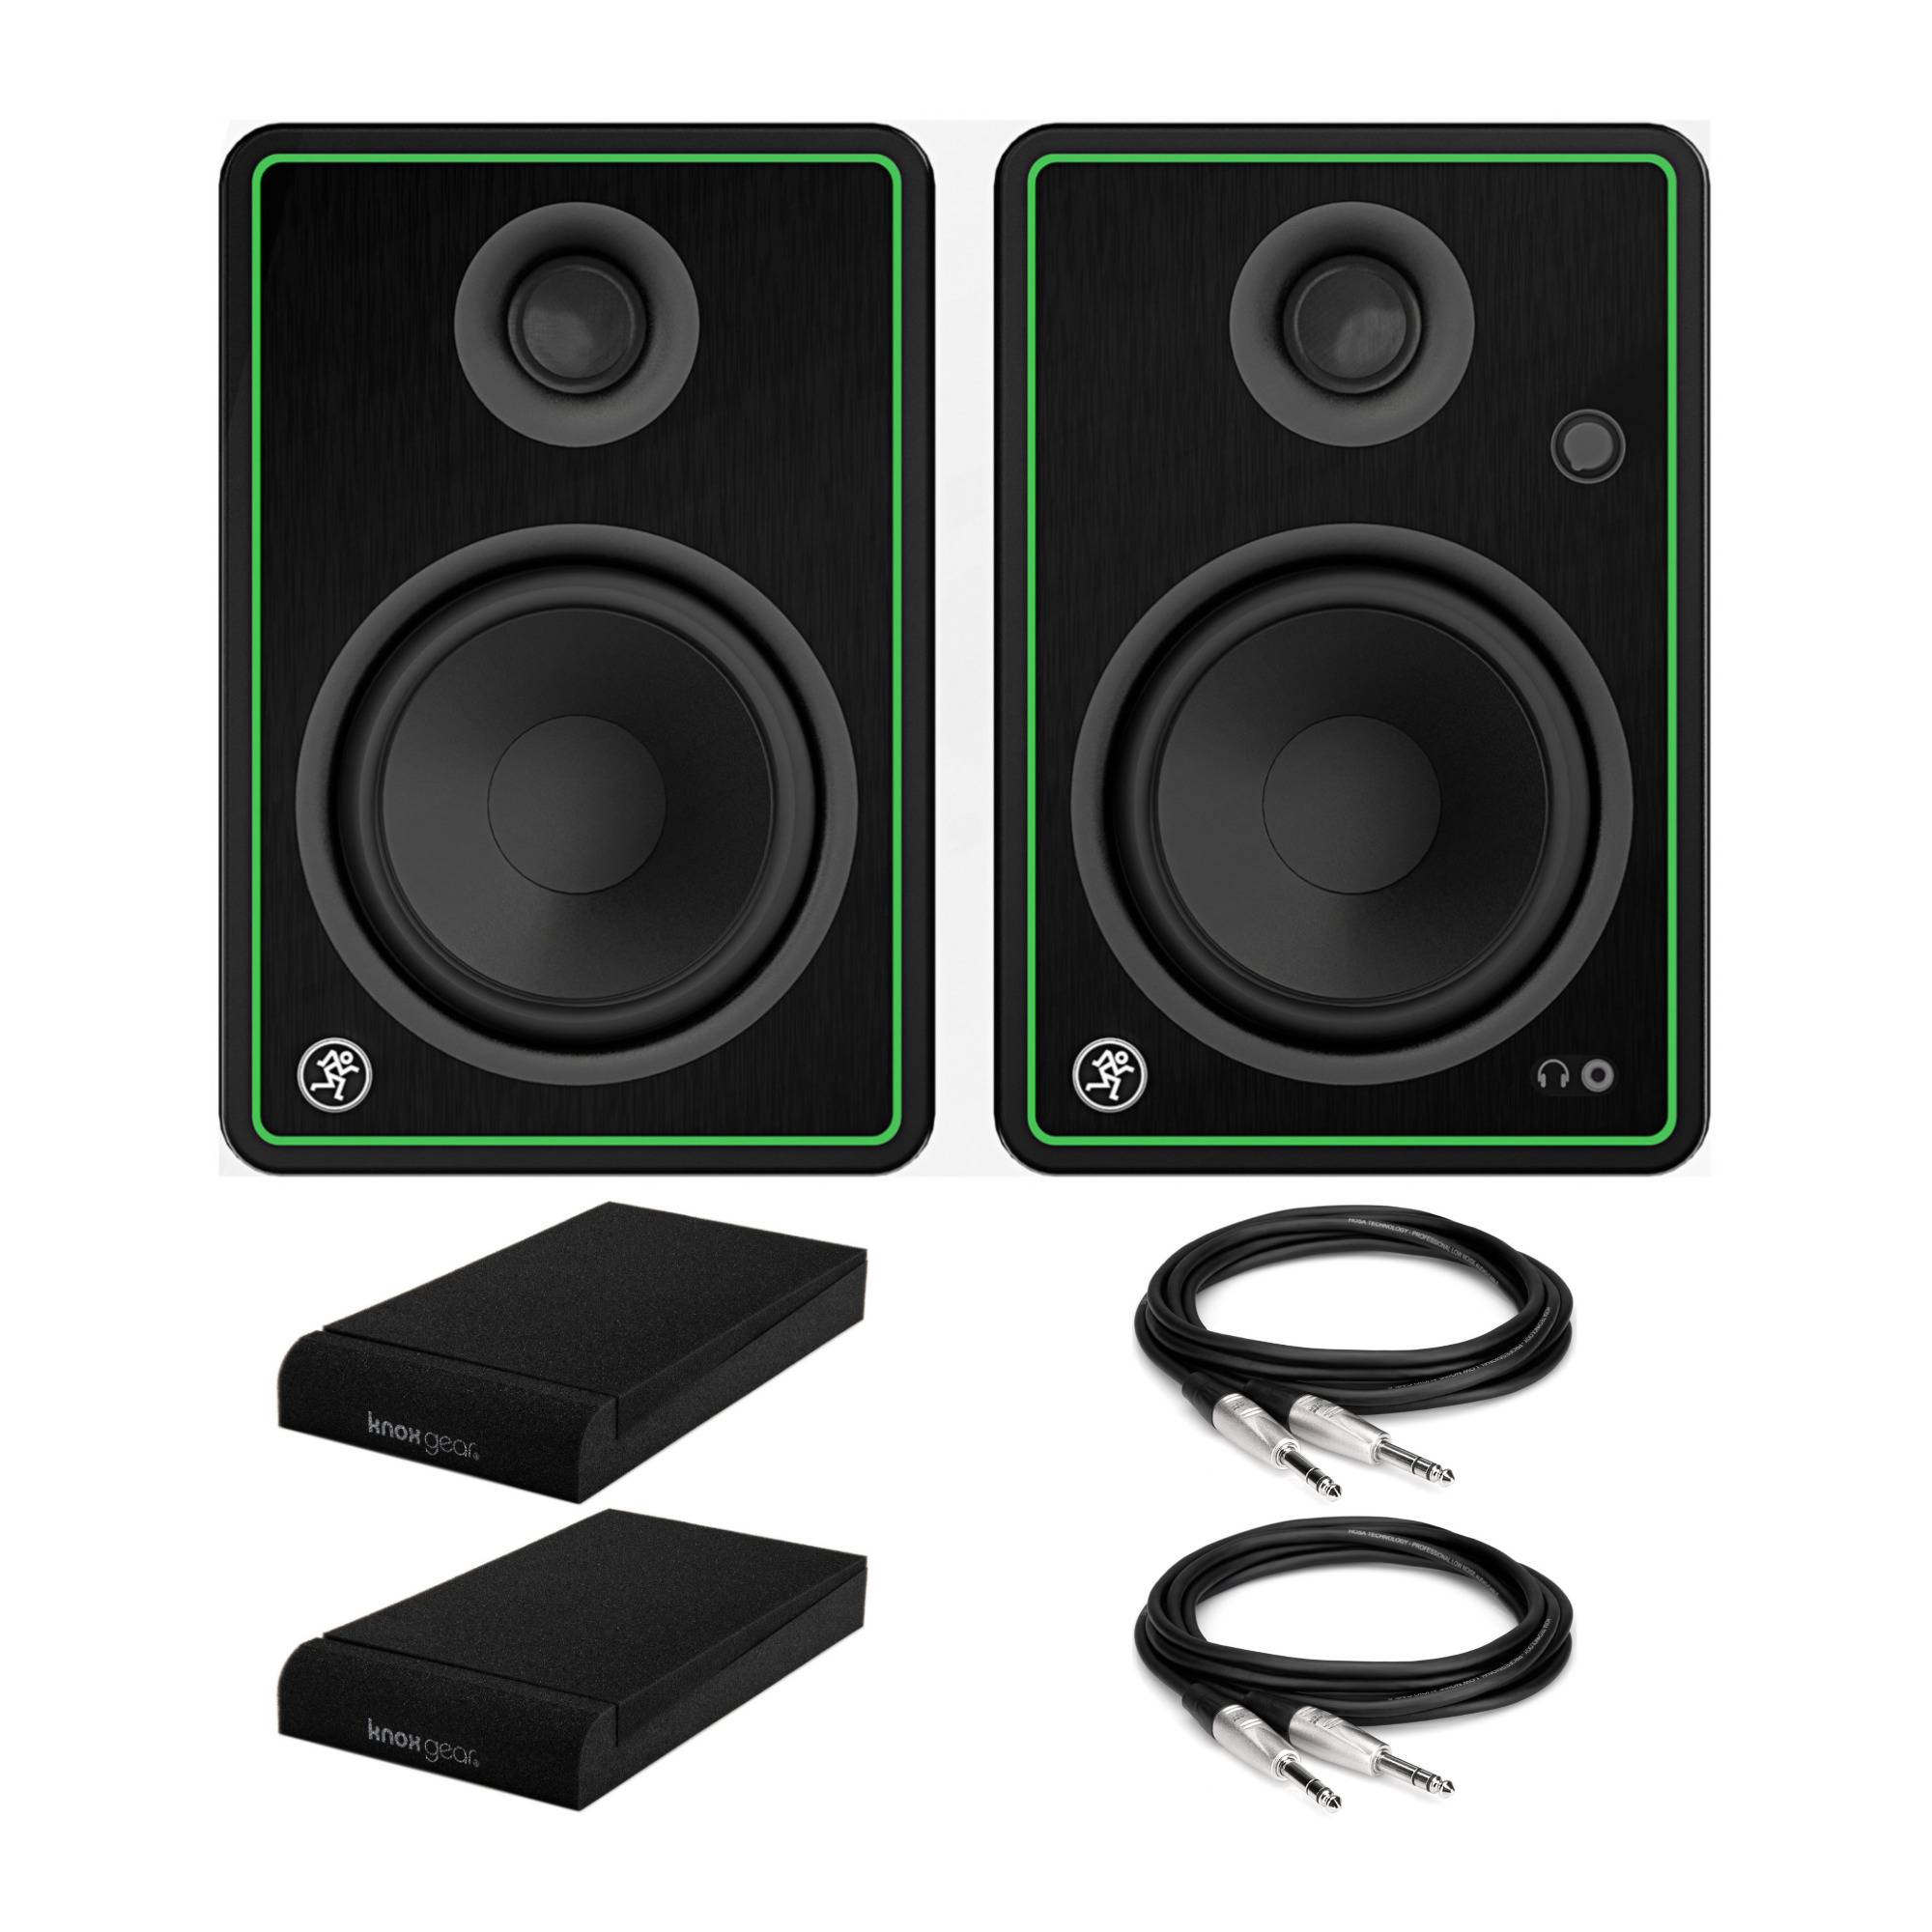 Mackie CR5-XBT 5-Inch Multimedia Monitors (Pair) Bundle with Isolation Pads & 1/4 to 1/4" Cables